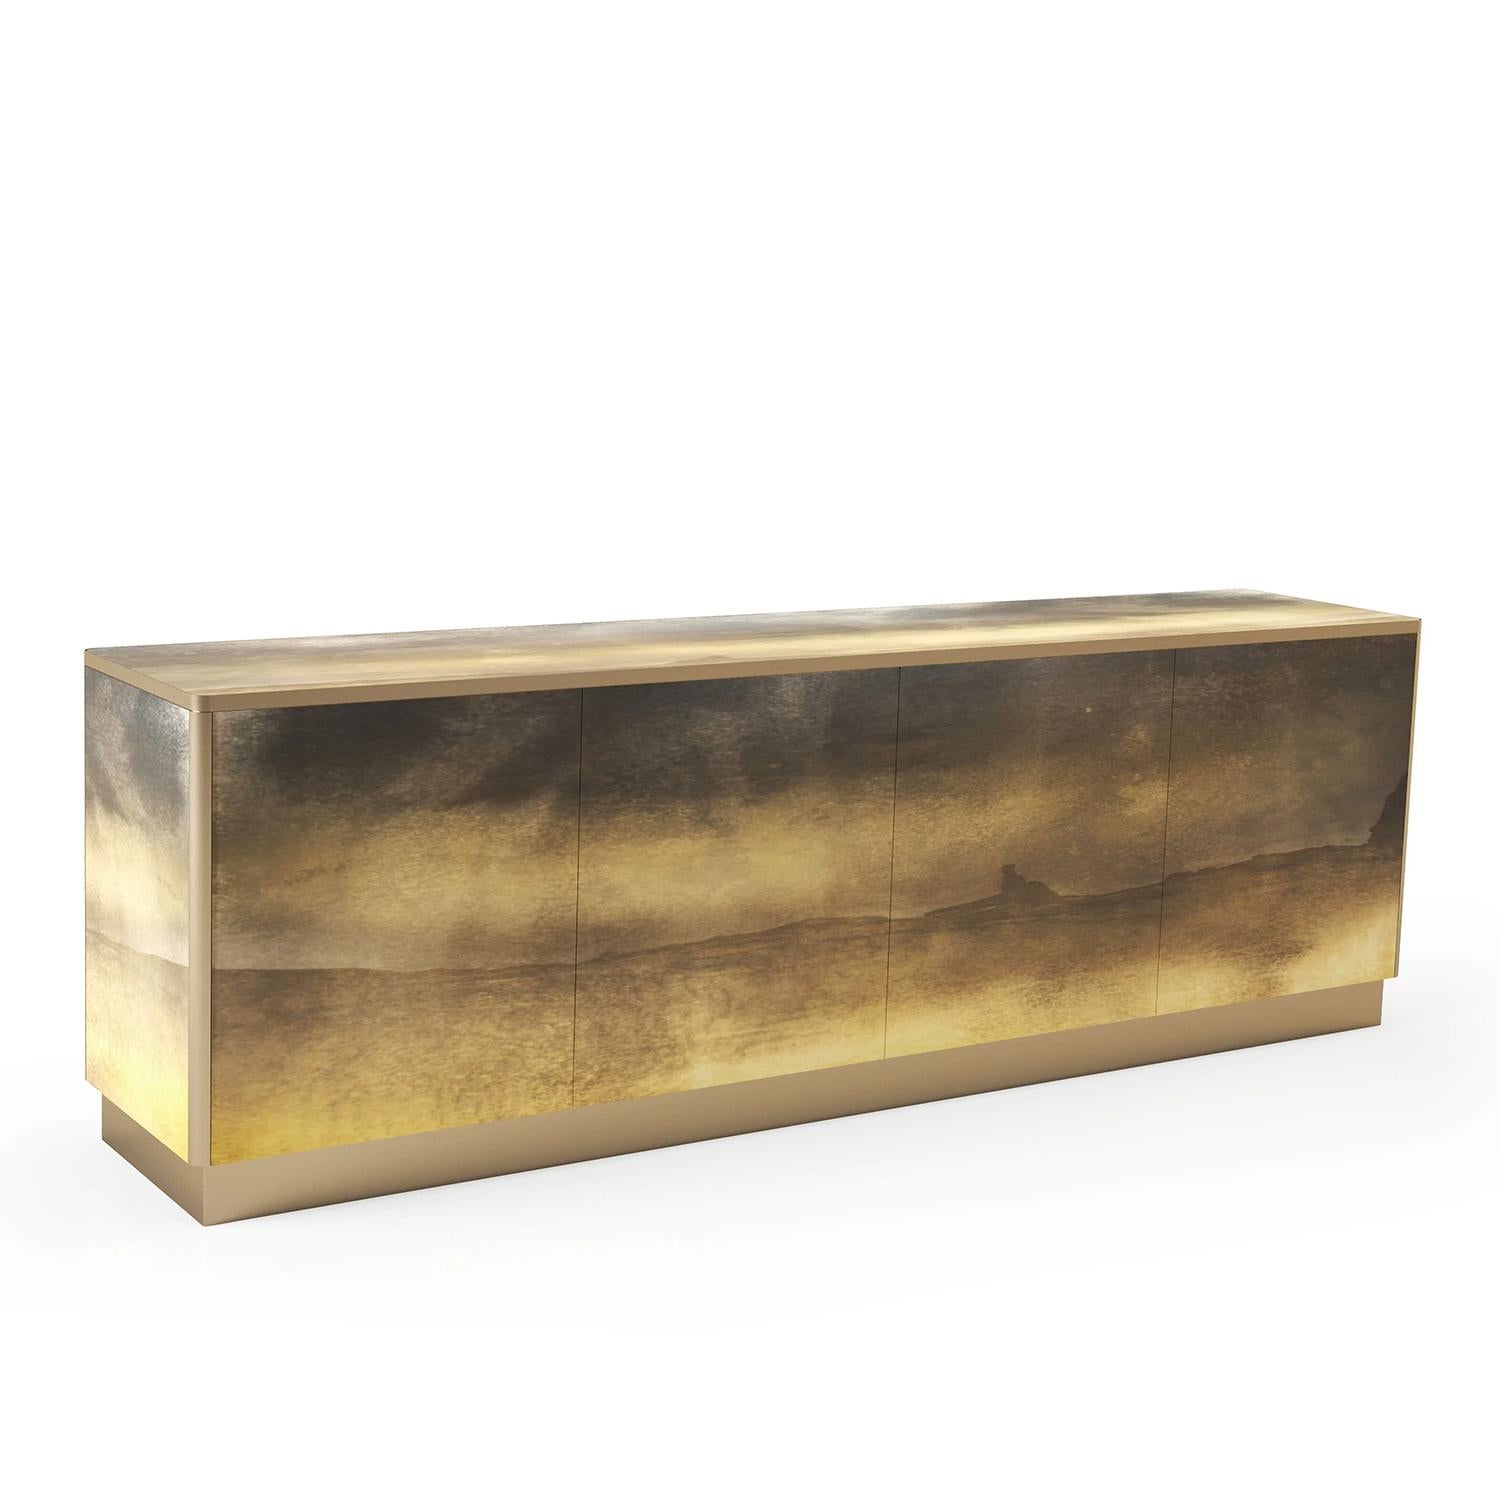 Sideboard San Angelo with structure in solid brass
in burnished finish. With etched glass top and all sides
engraved with diamond pen with silvered antique finish 
and varnished gold paint.